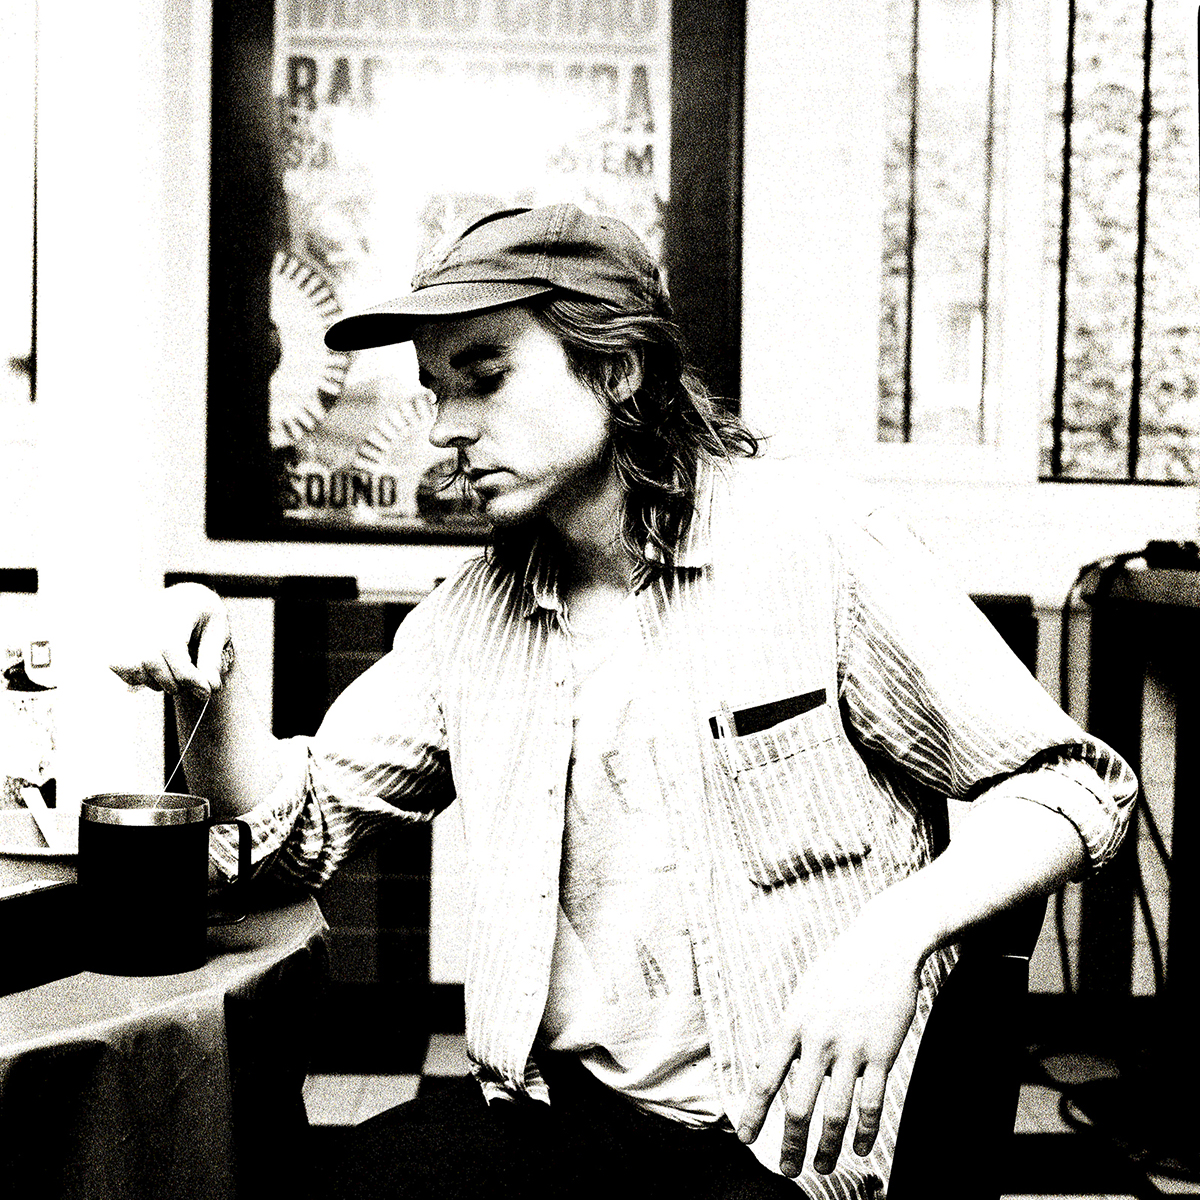 Slightly grainly black and white photo of singer-songwriter Any Shauf seated at a table, tugging at a tea bag in a mug